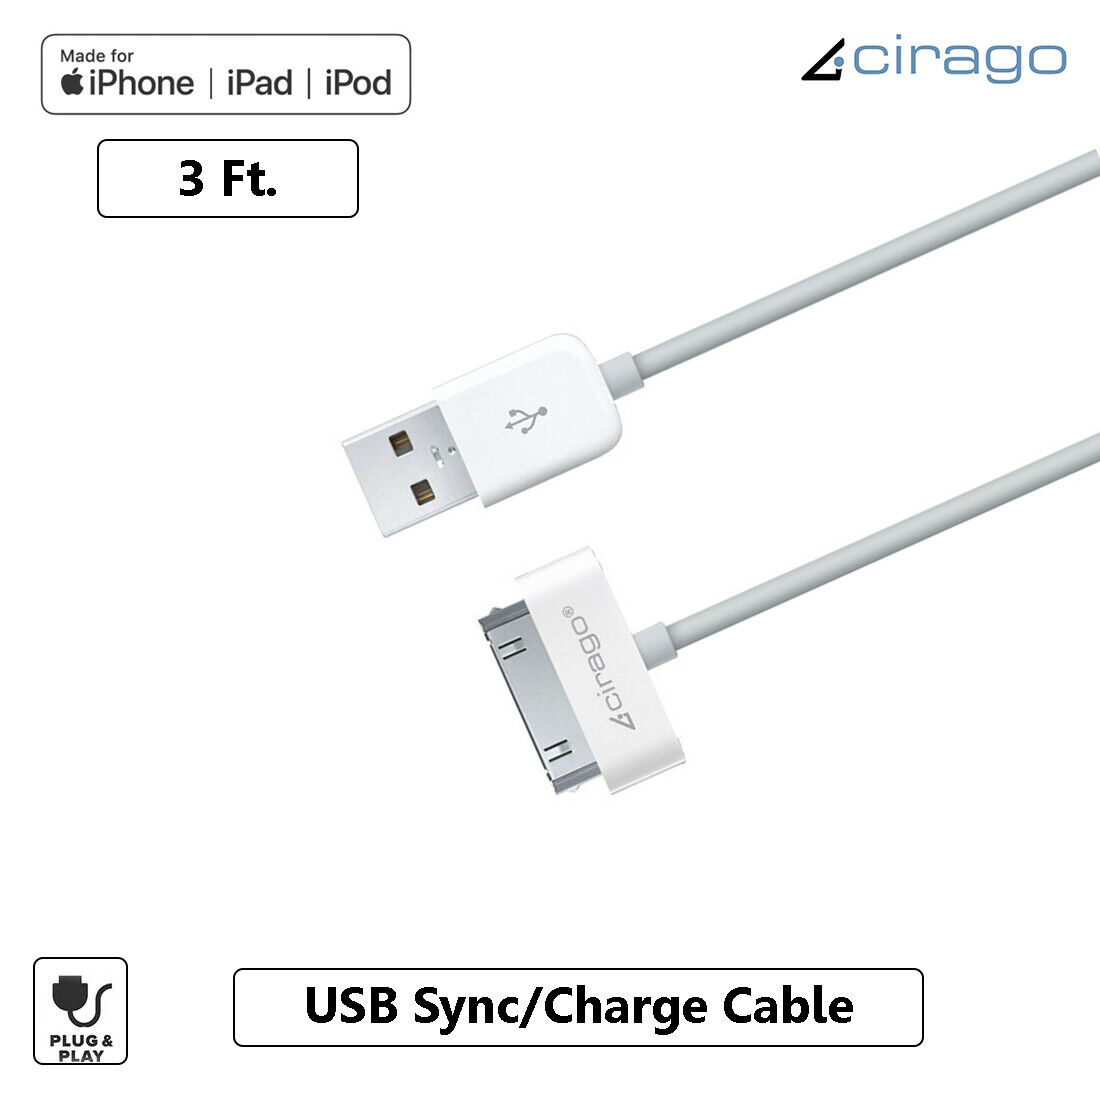 Cirago 3Ft USB Sync Charge Cable for Galaxy Tab | Note | iPad | iPhone | iPod